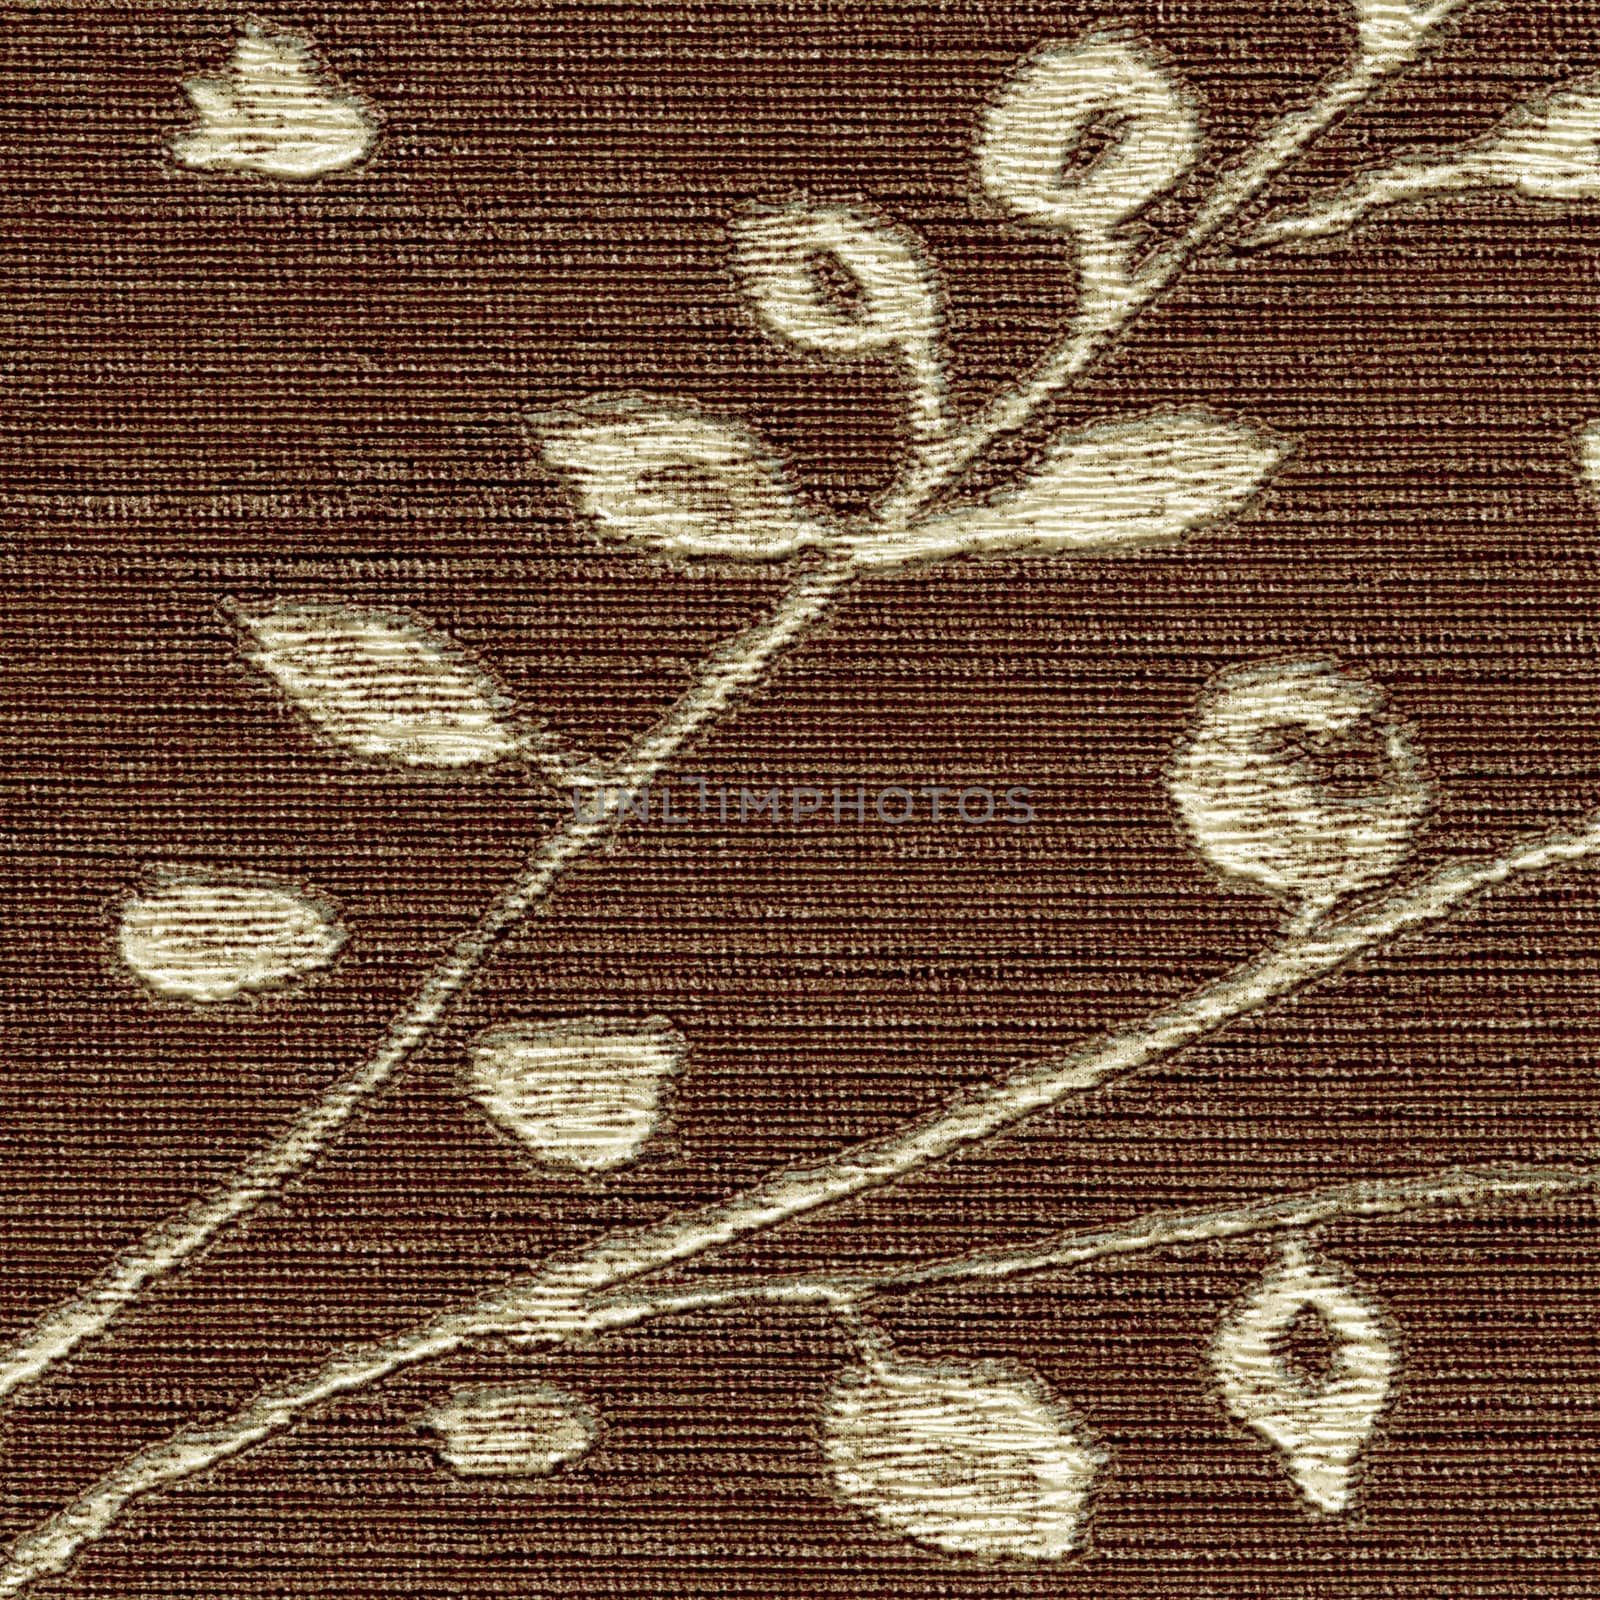 Branch pattern fabric texture. (High.res.scan.)